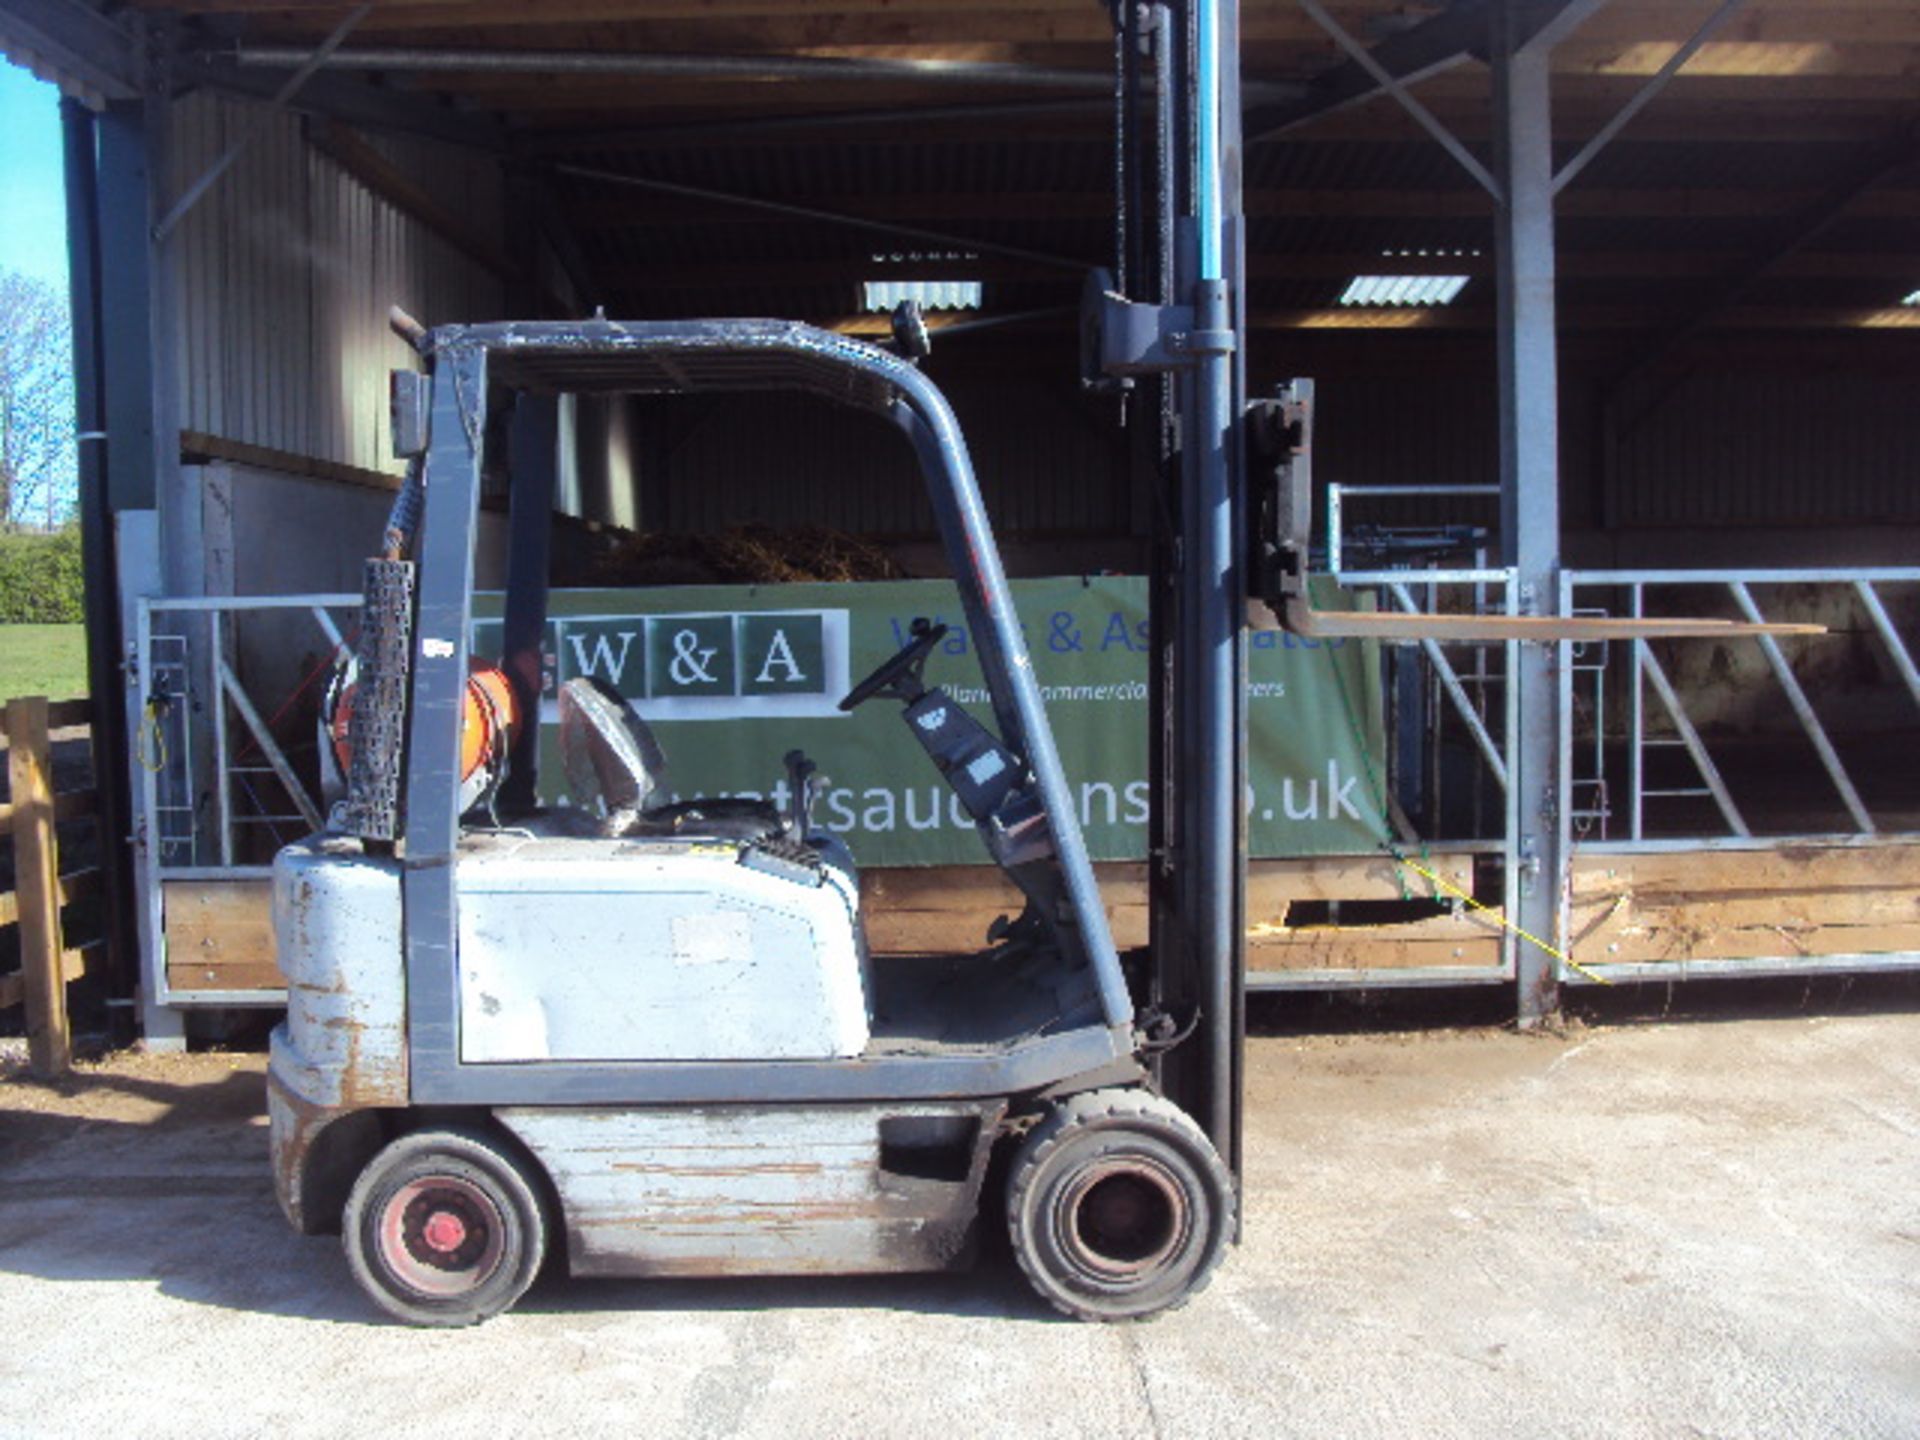 FIAT G20 2t gas driven forklift truck with duplex mast & side-shift (6351 rec hrs)(RDL) (This item - Image 5 of 5